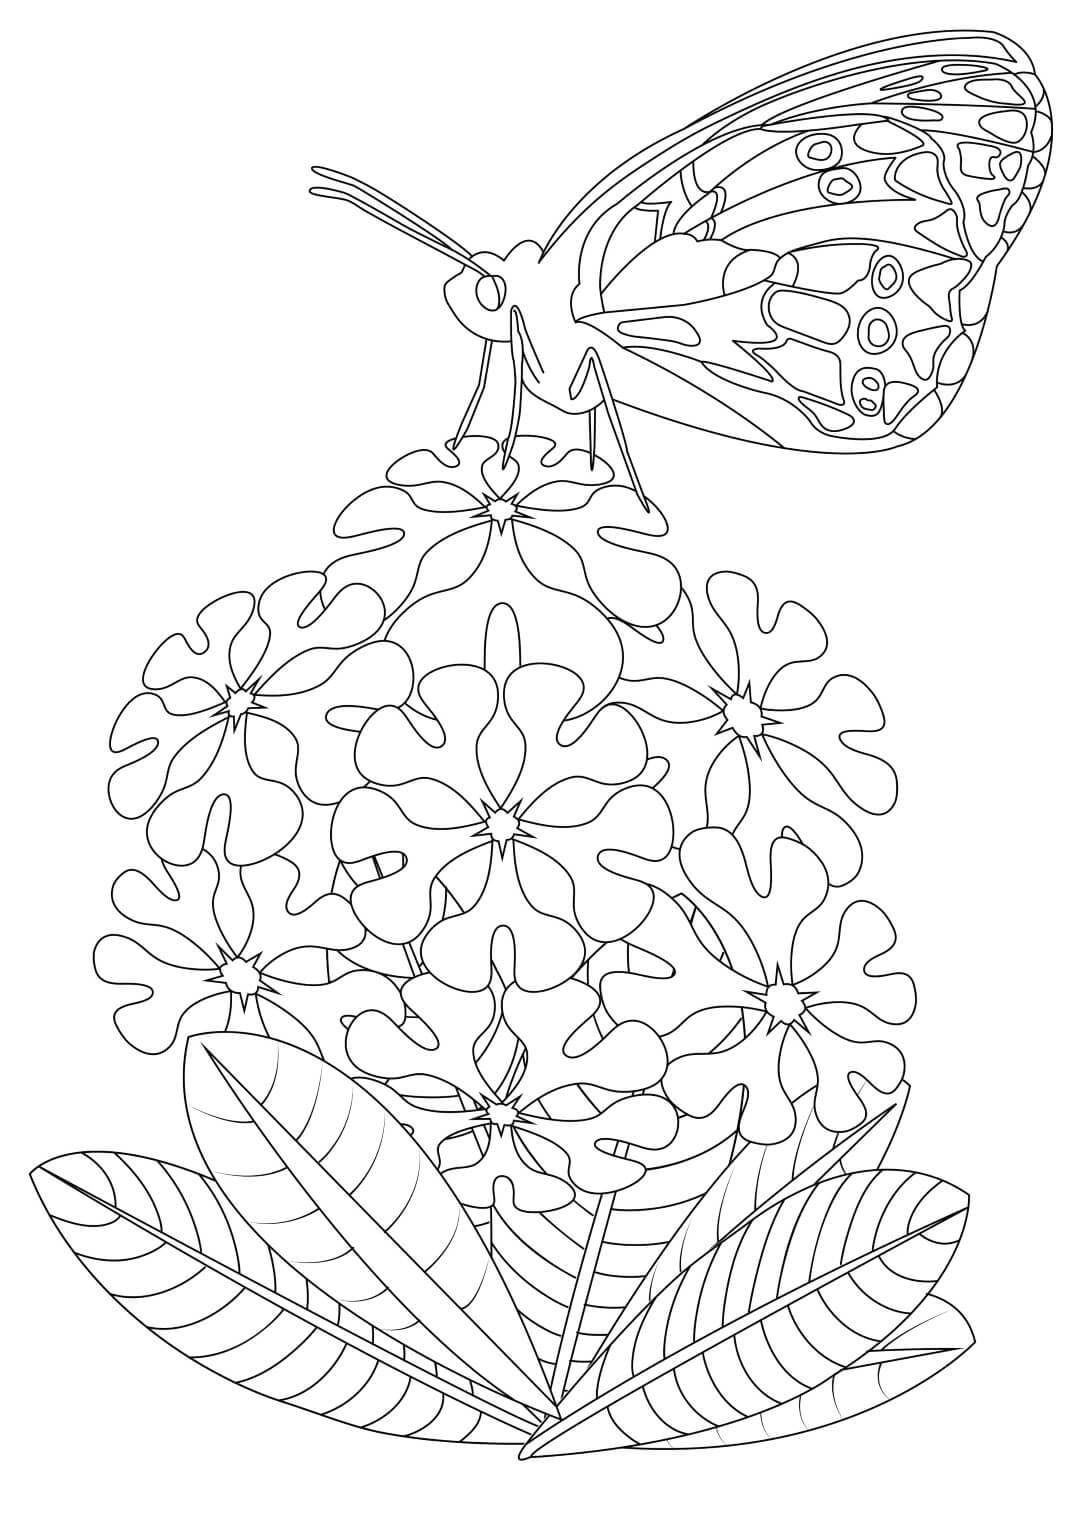 Butterfly on Flower Coloring Page